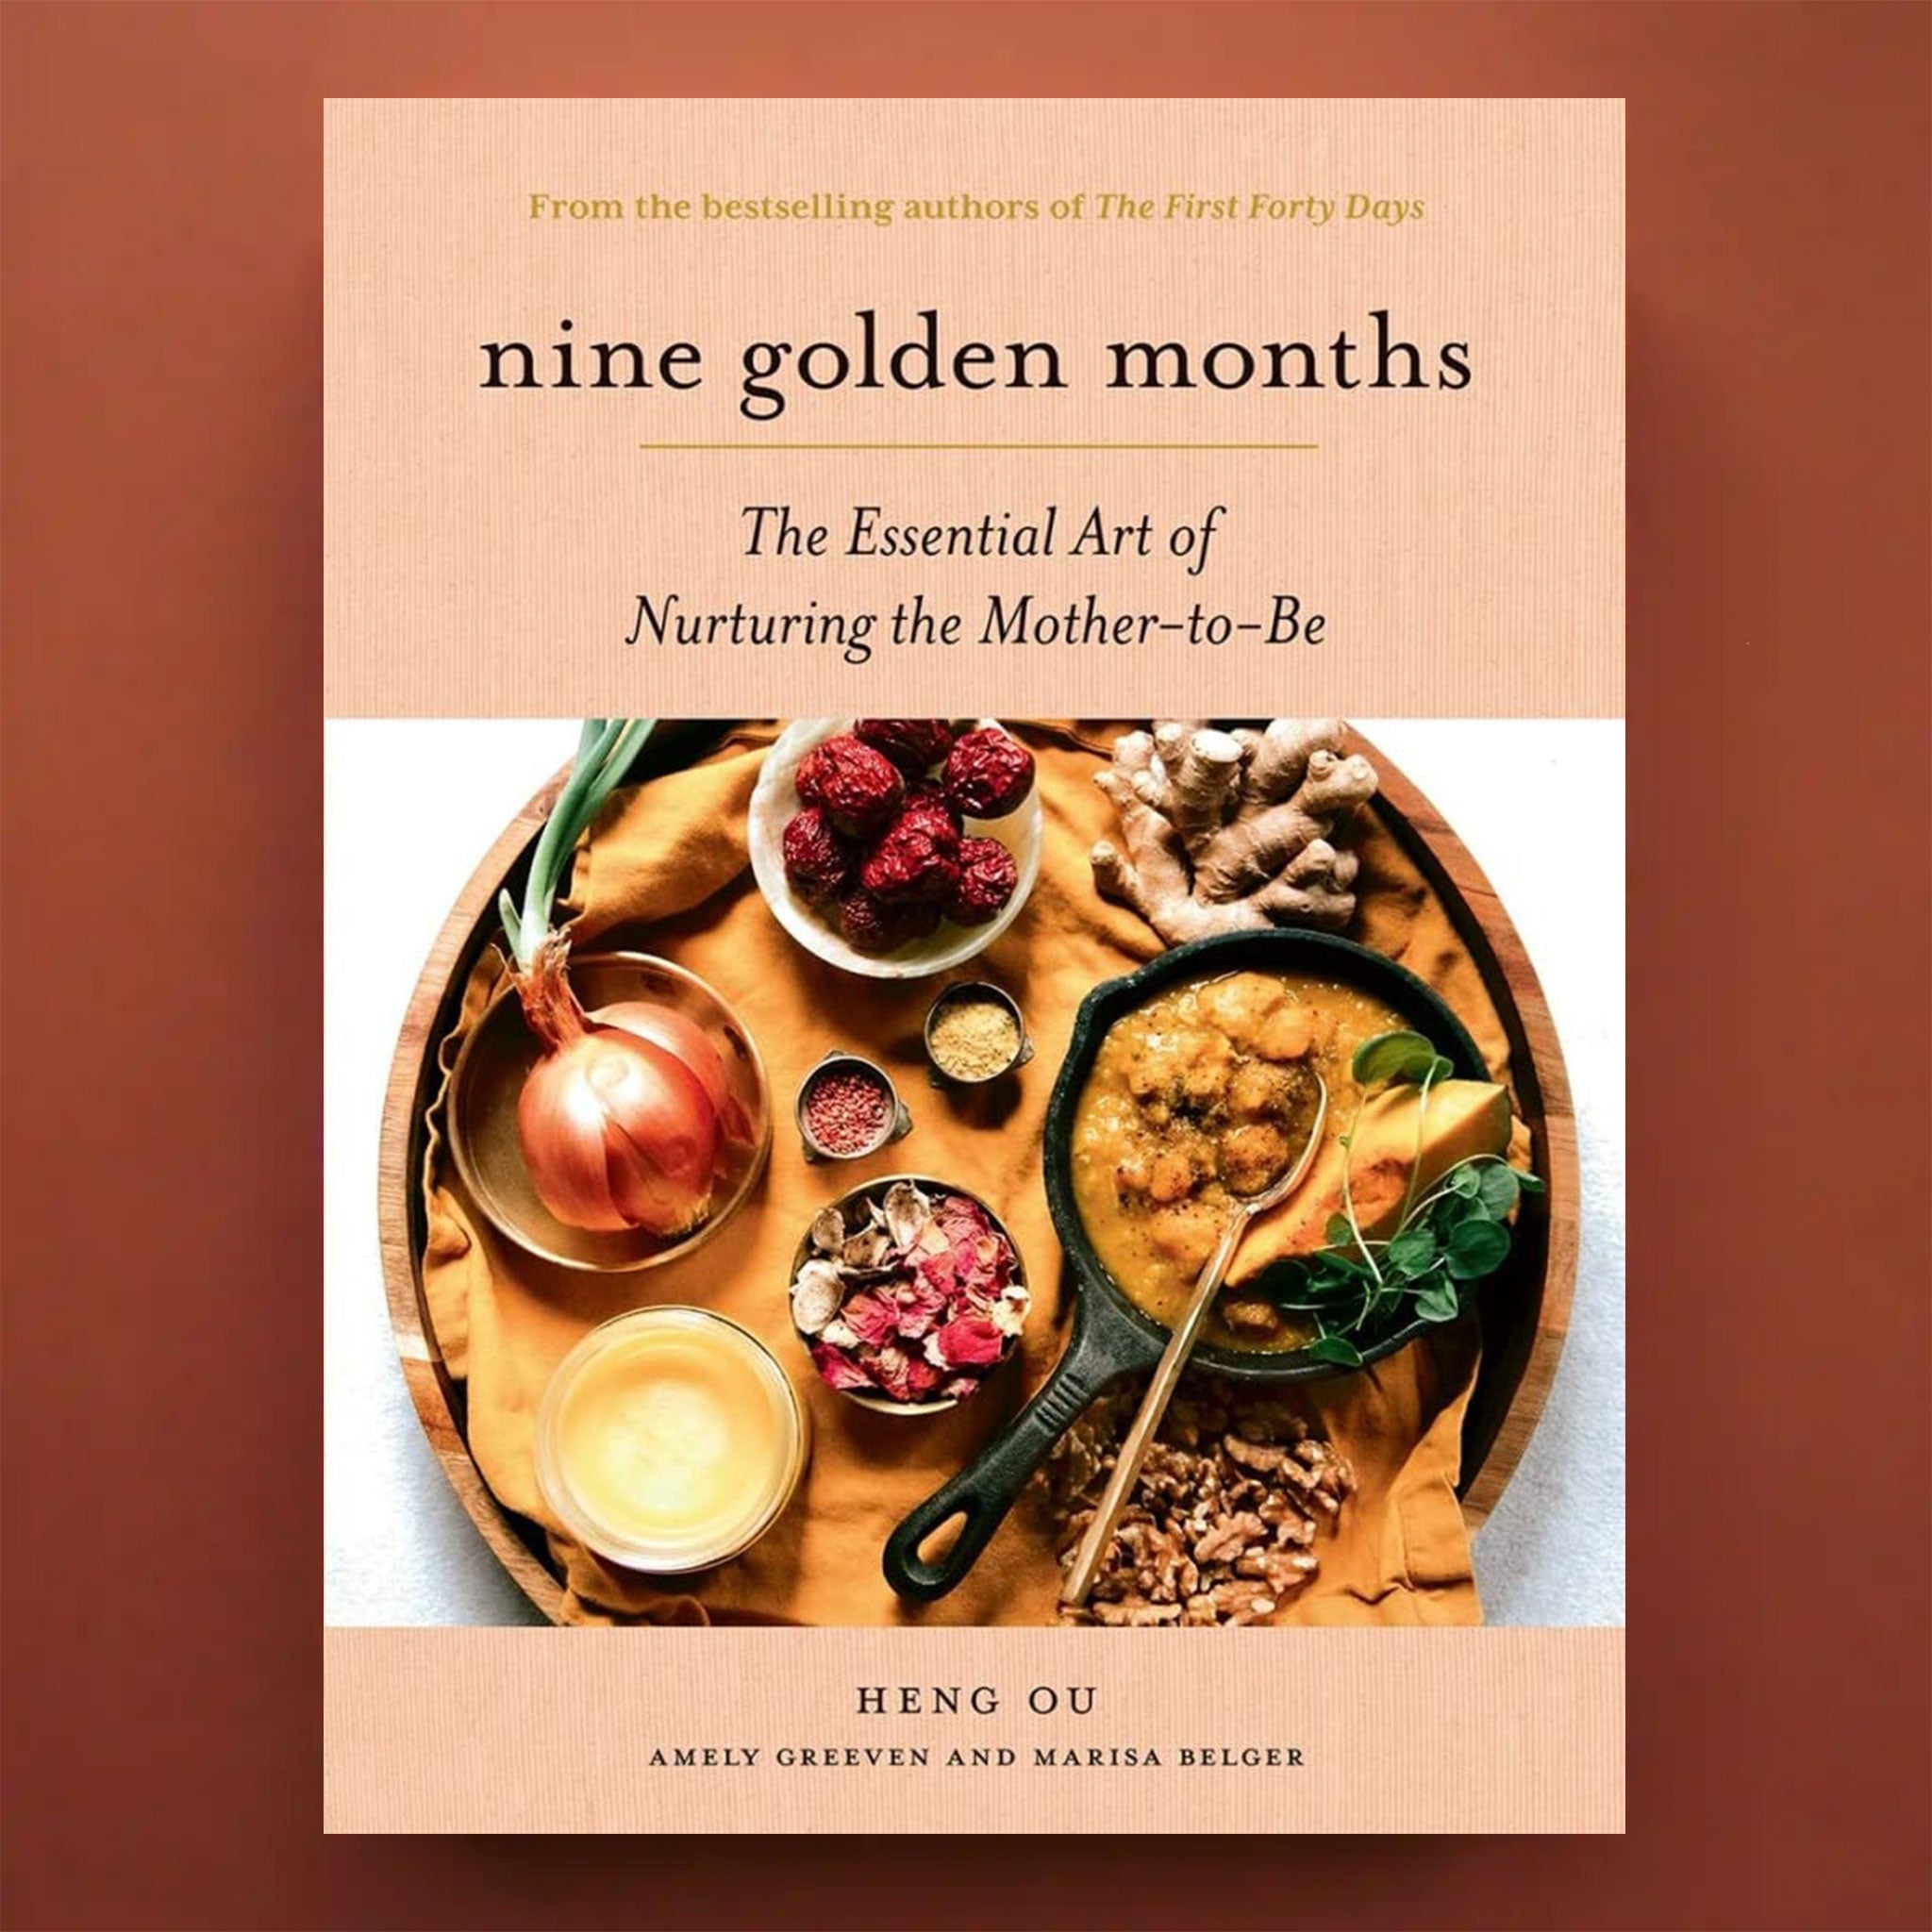 On a brown background is a book with a plate of food and the title at the top that reads, "nine golden months", "The Essential Art of Nurturing the Mother-to-Be".